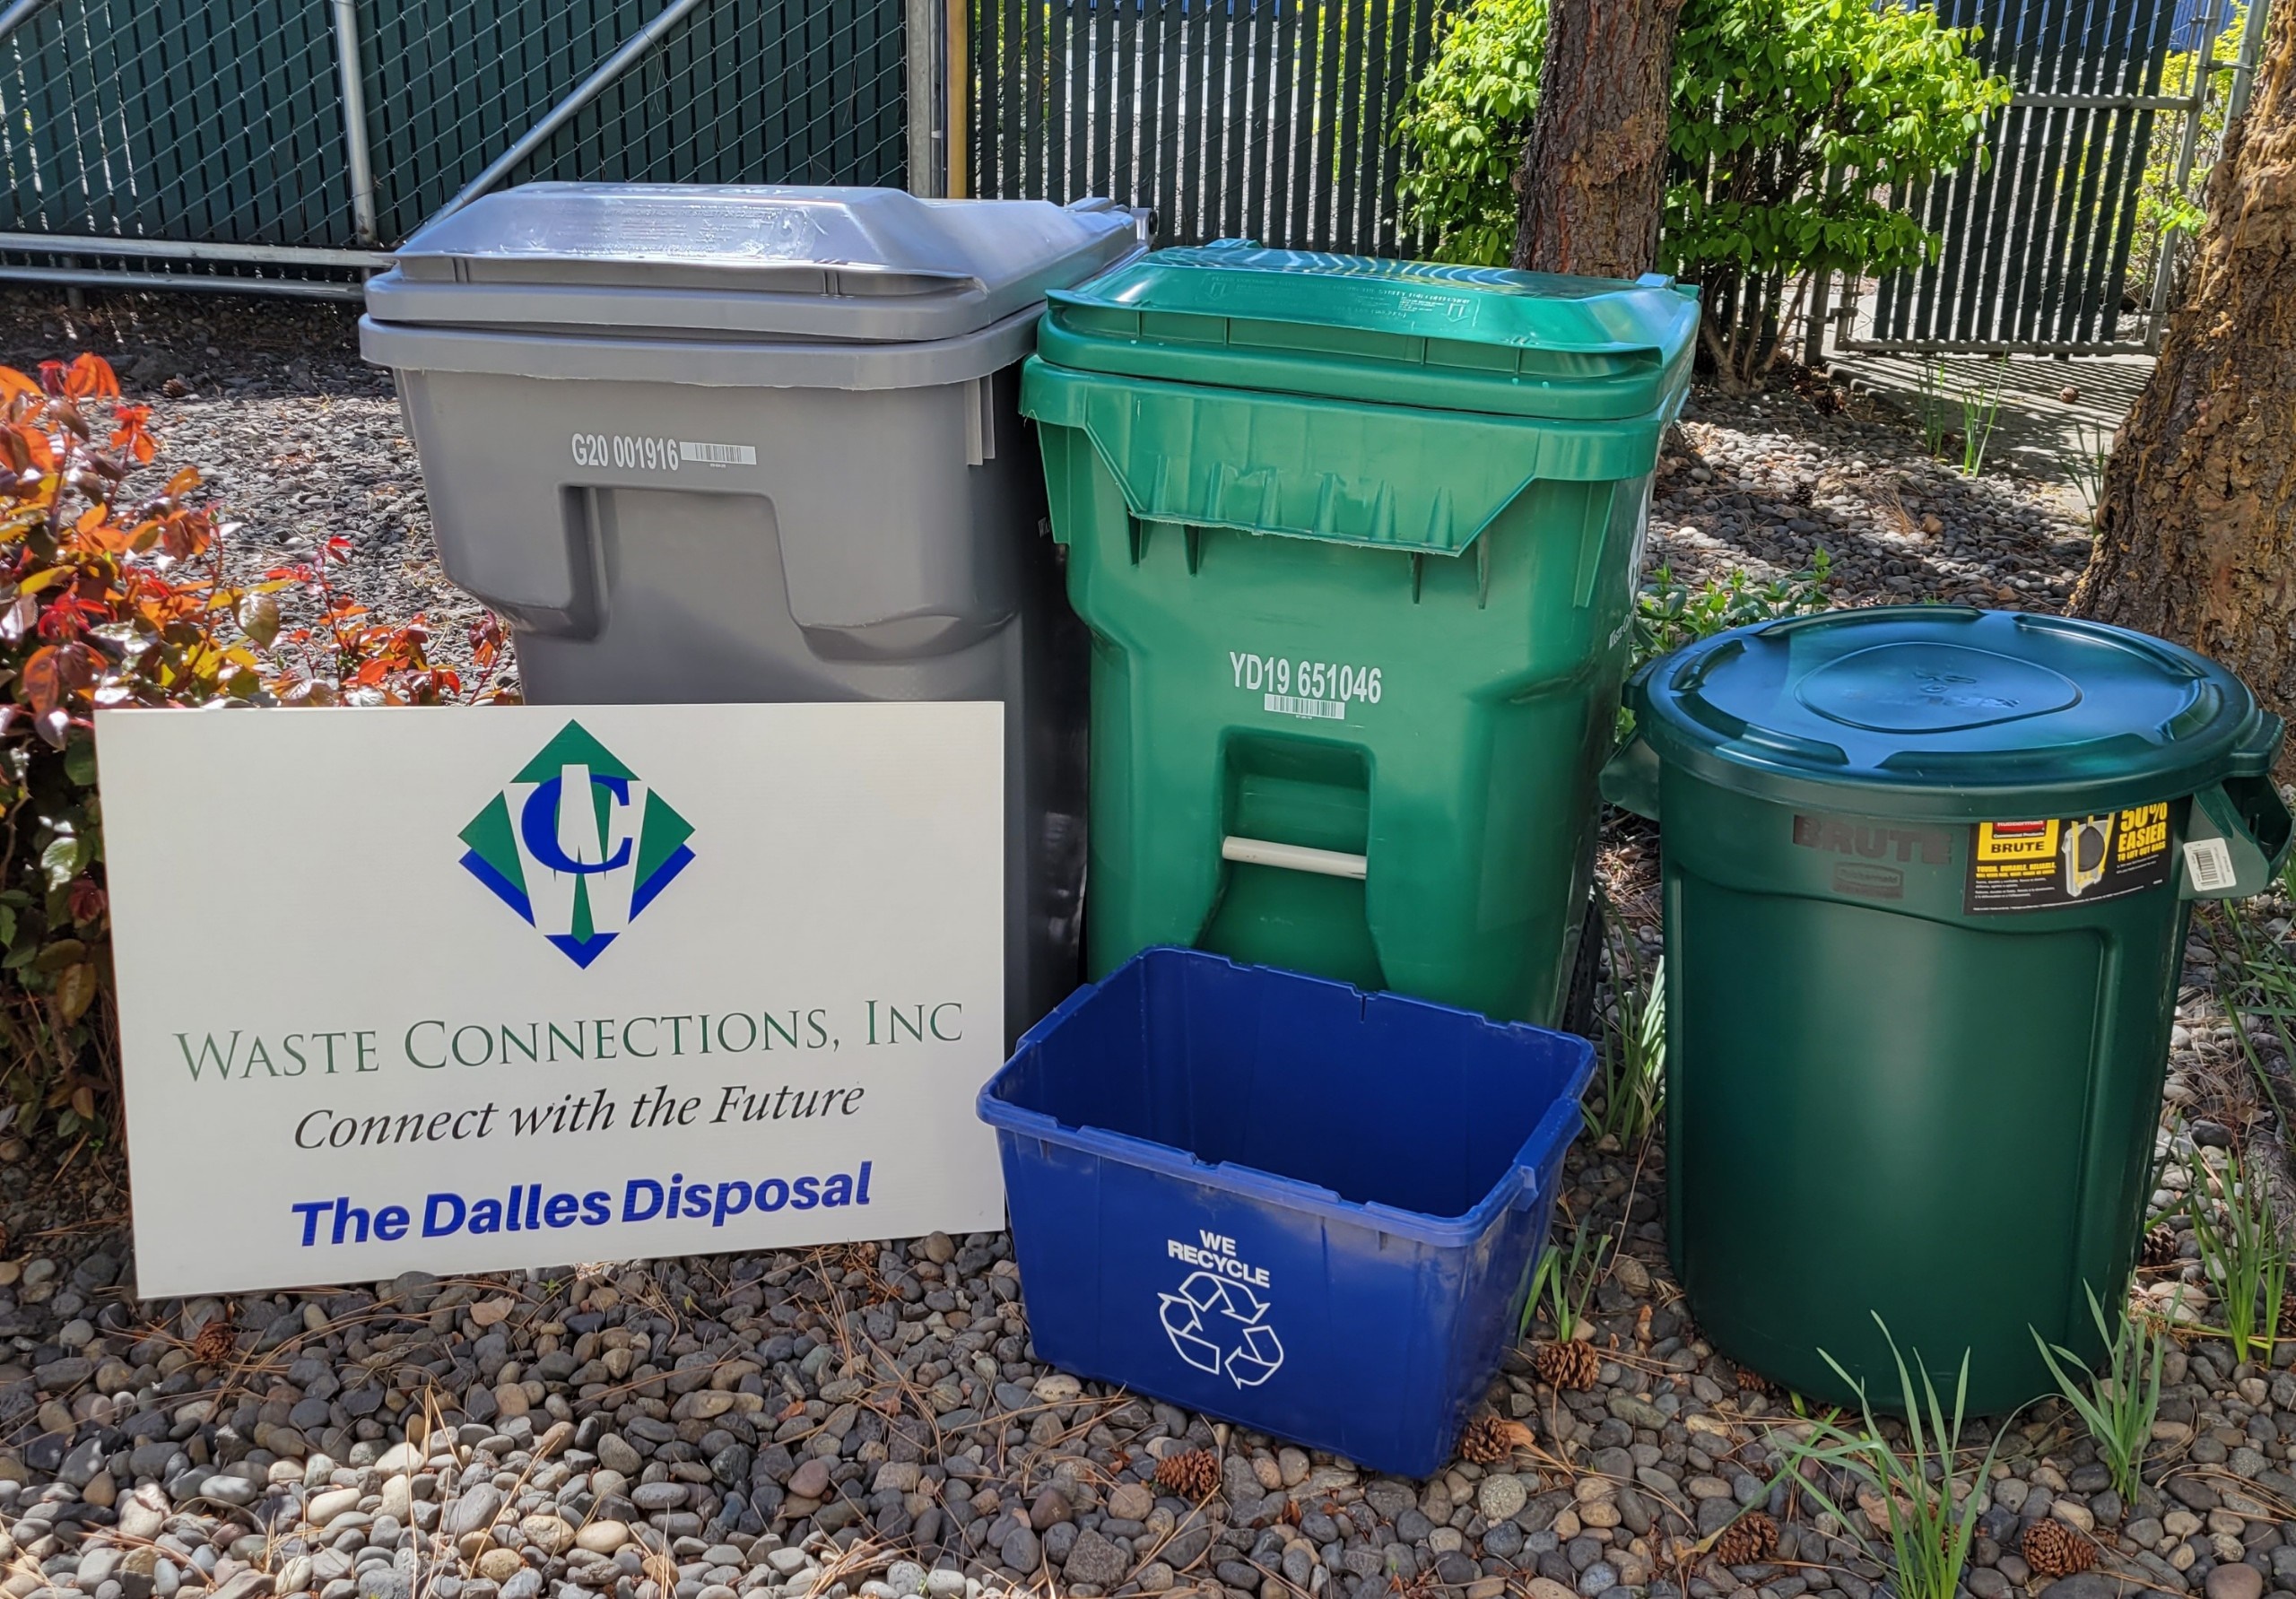 The Dalles Disposal residential trash and recycling bins.